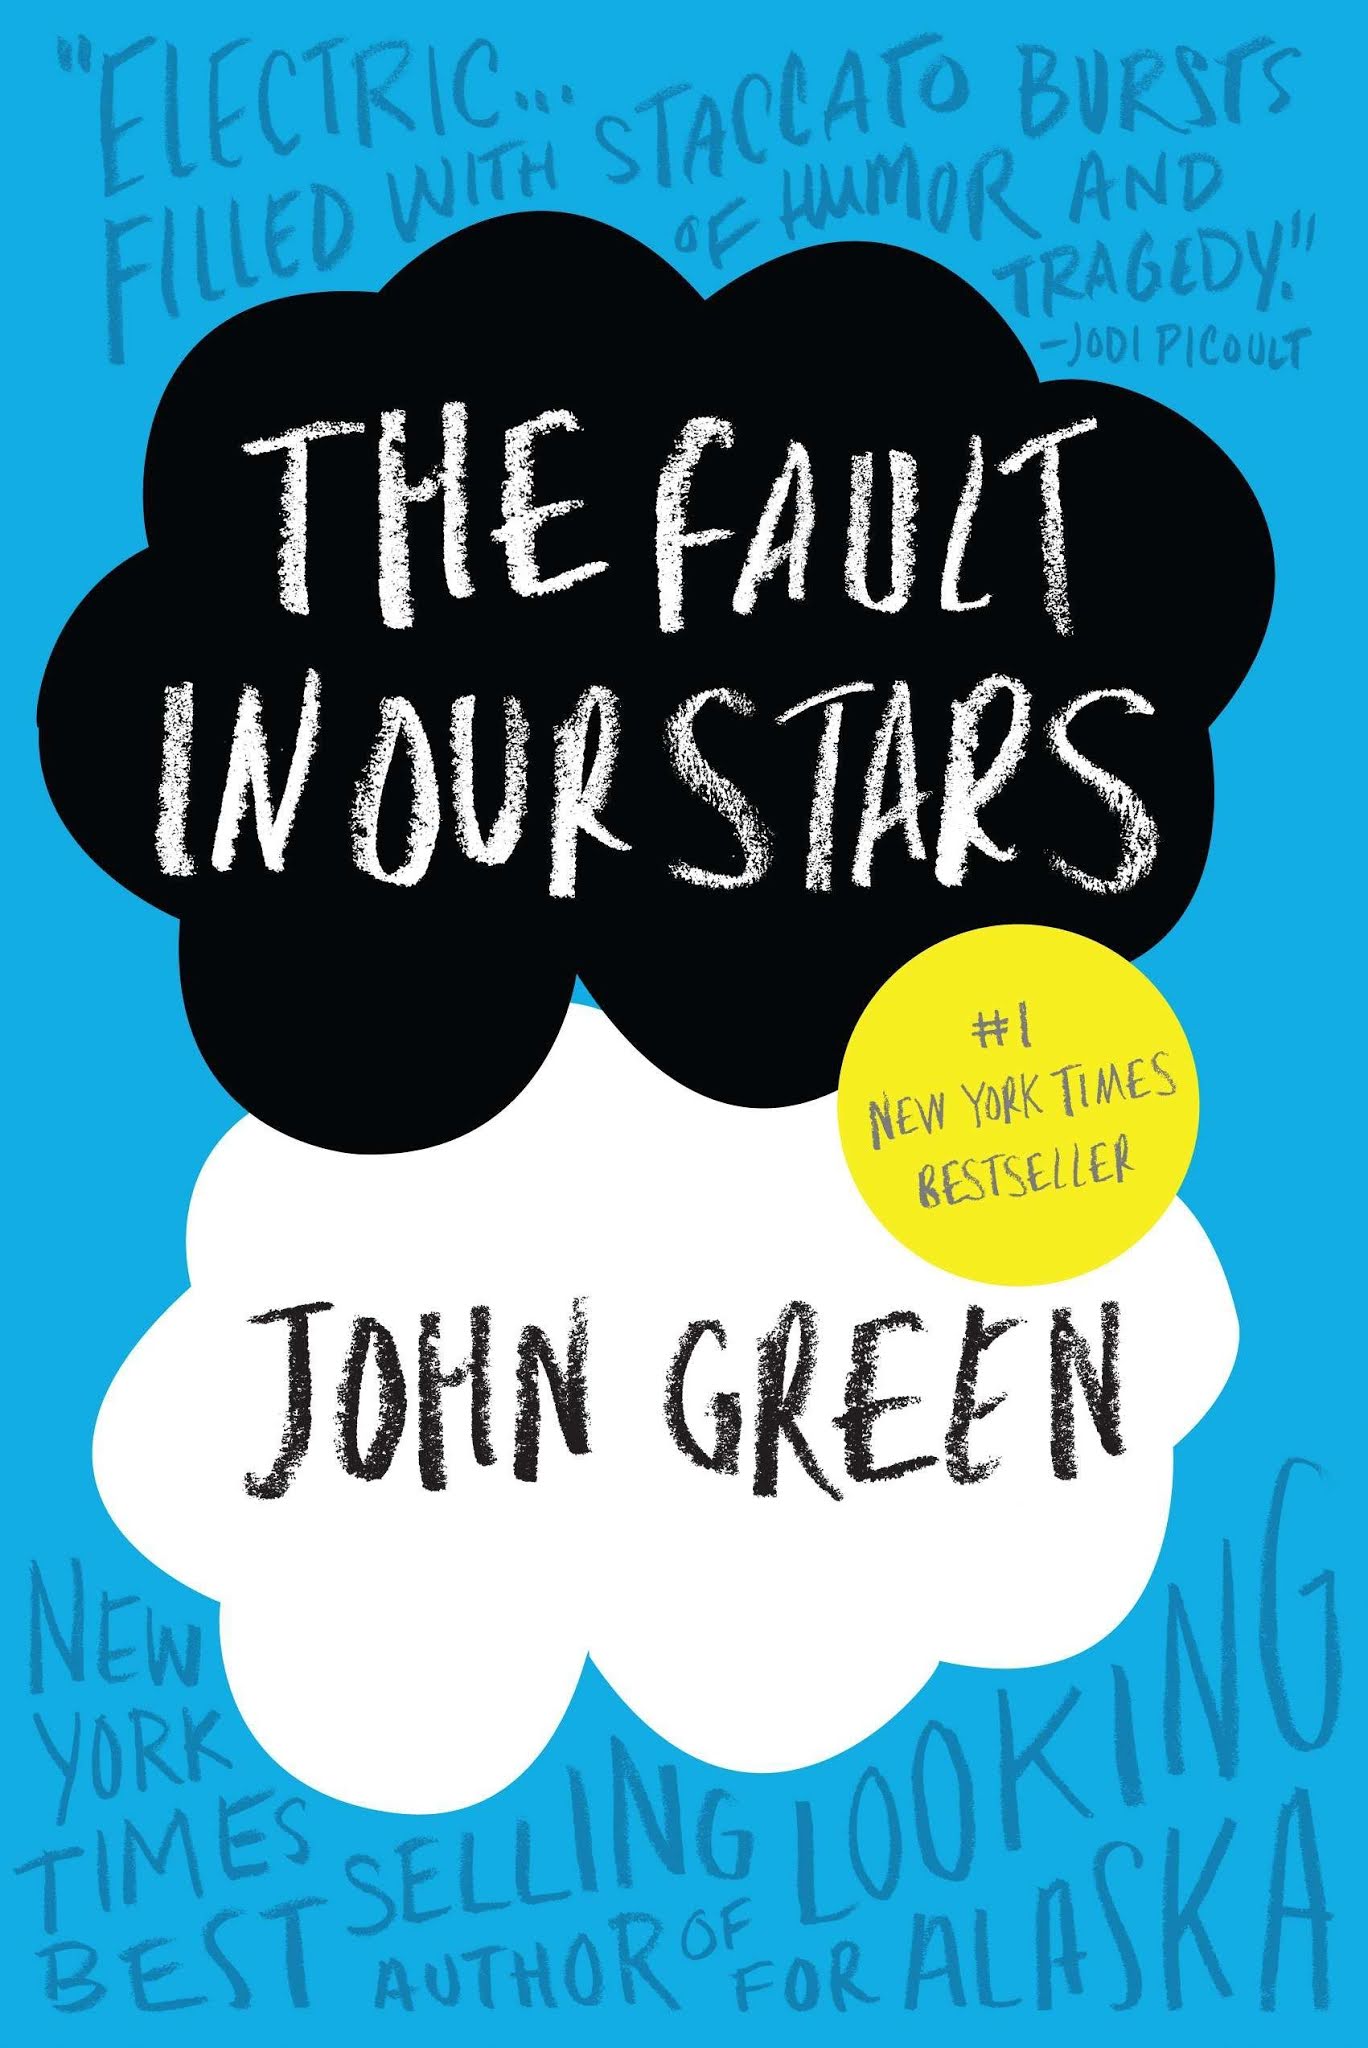 the fault in our stars book review no spoilers